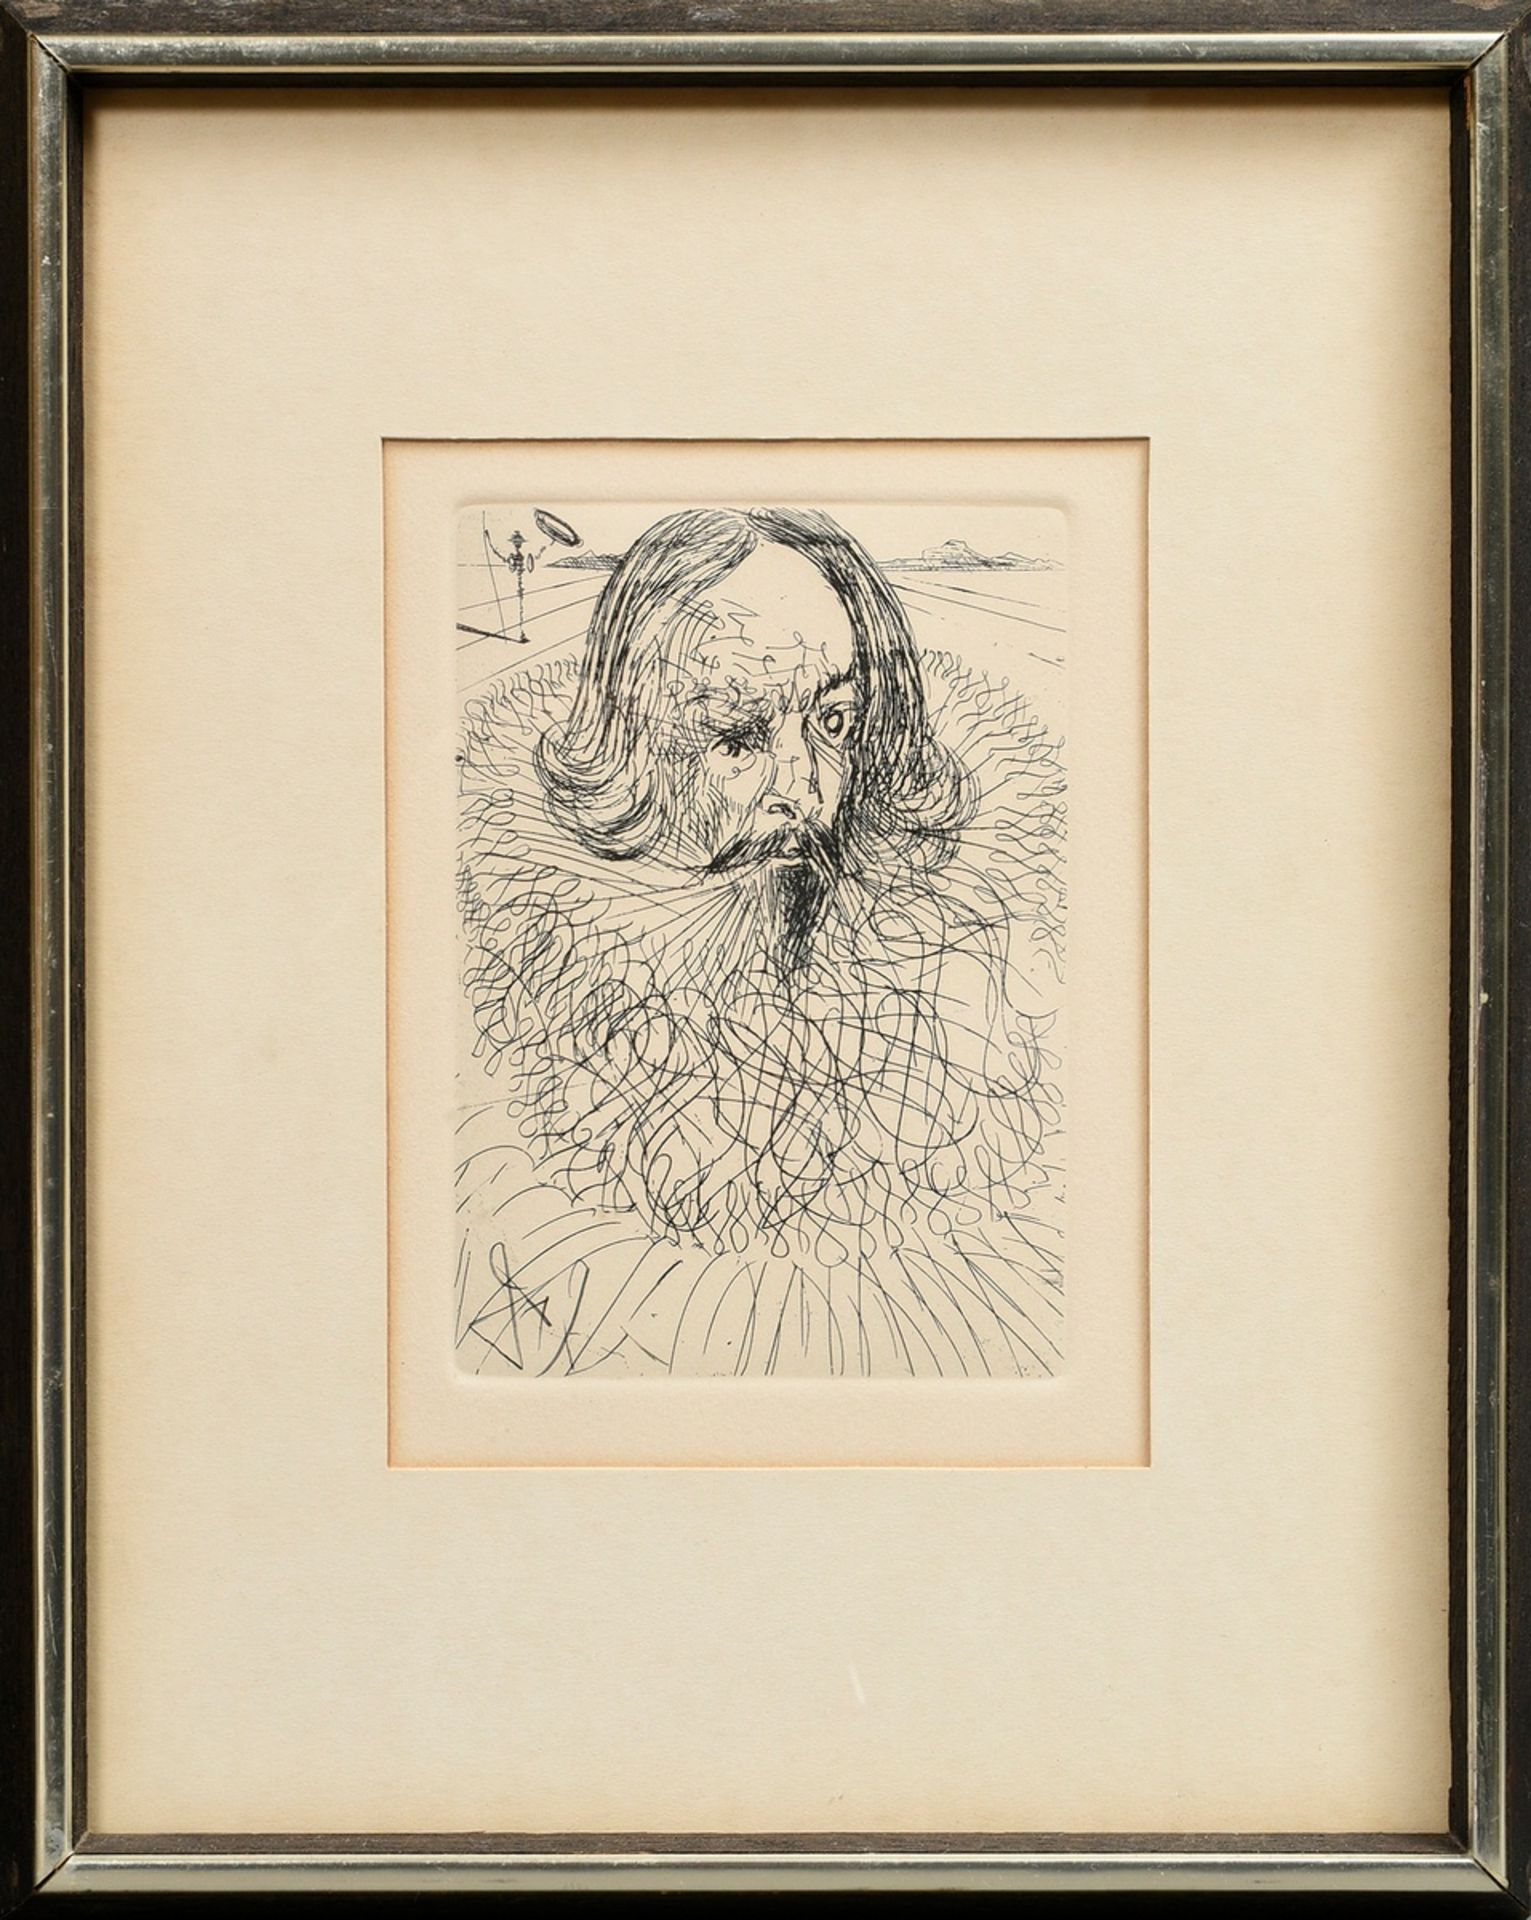 Dali, Salvador (1904-1989) "Cervantes" c. 1966, etching, from: "Five Spanish Portraits", sign. lowe - Image 2 of 3